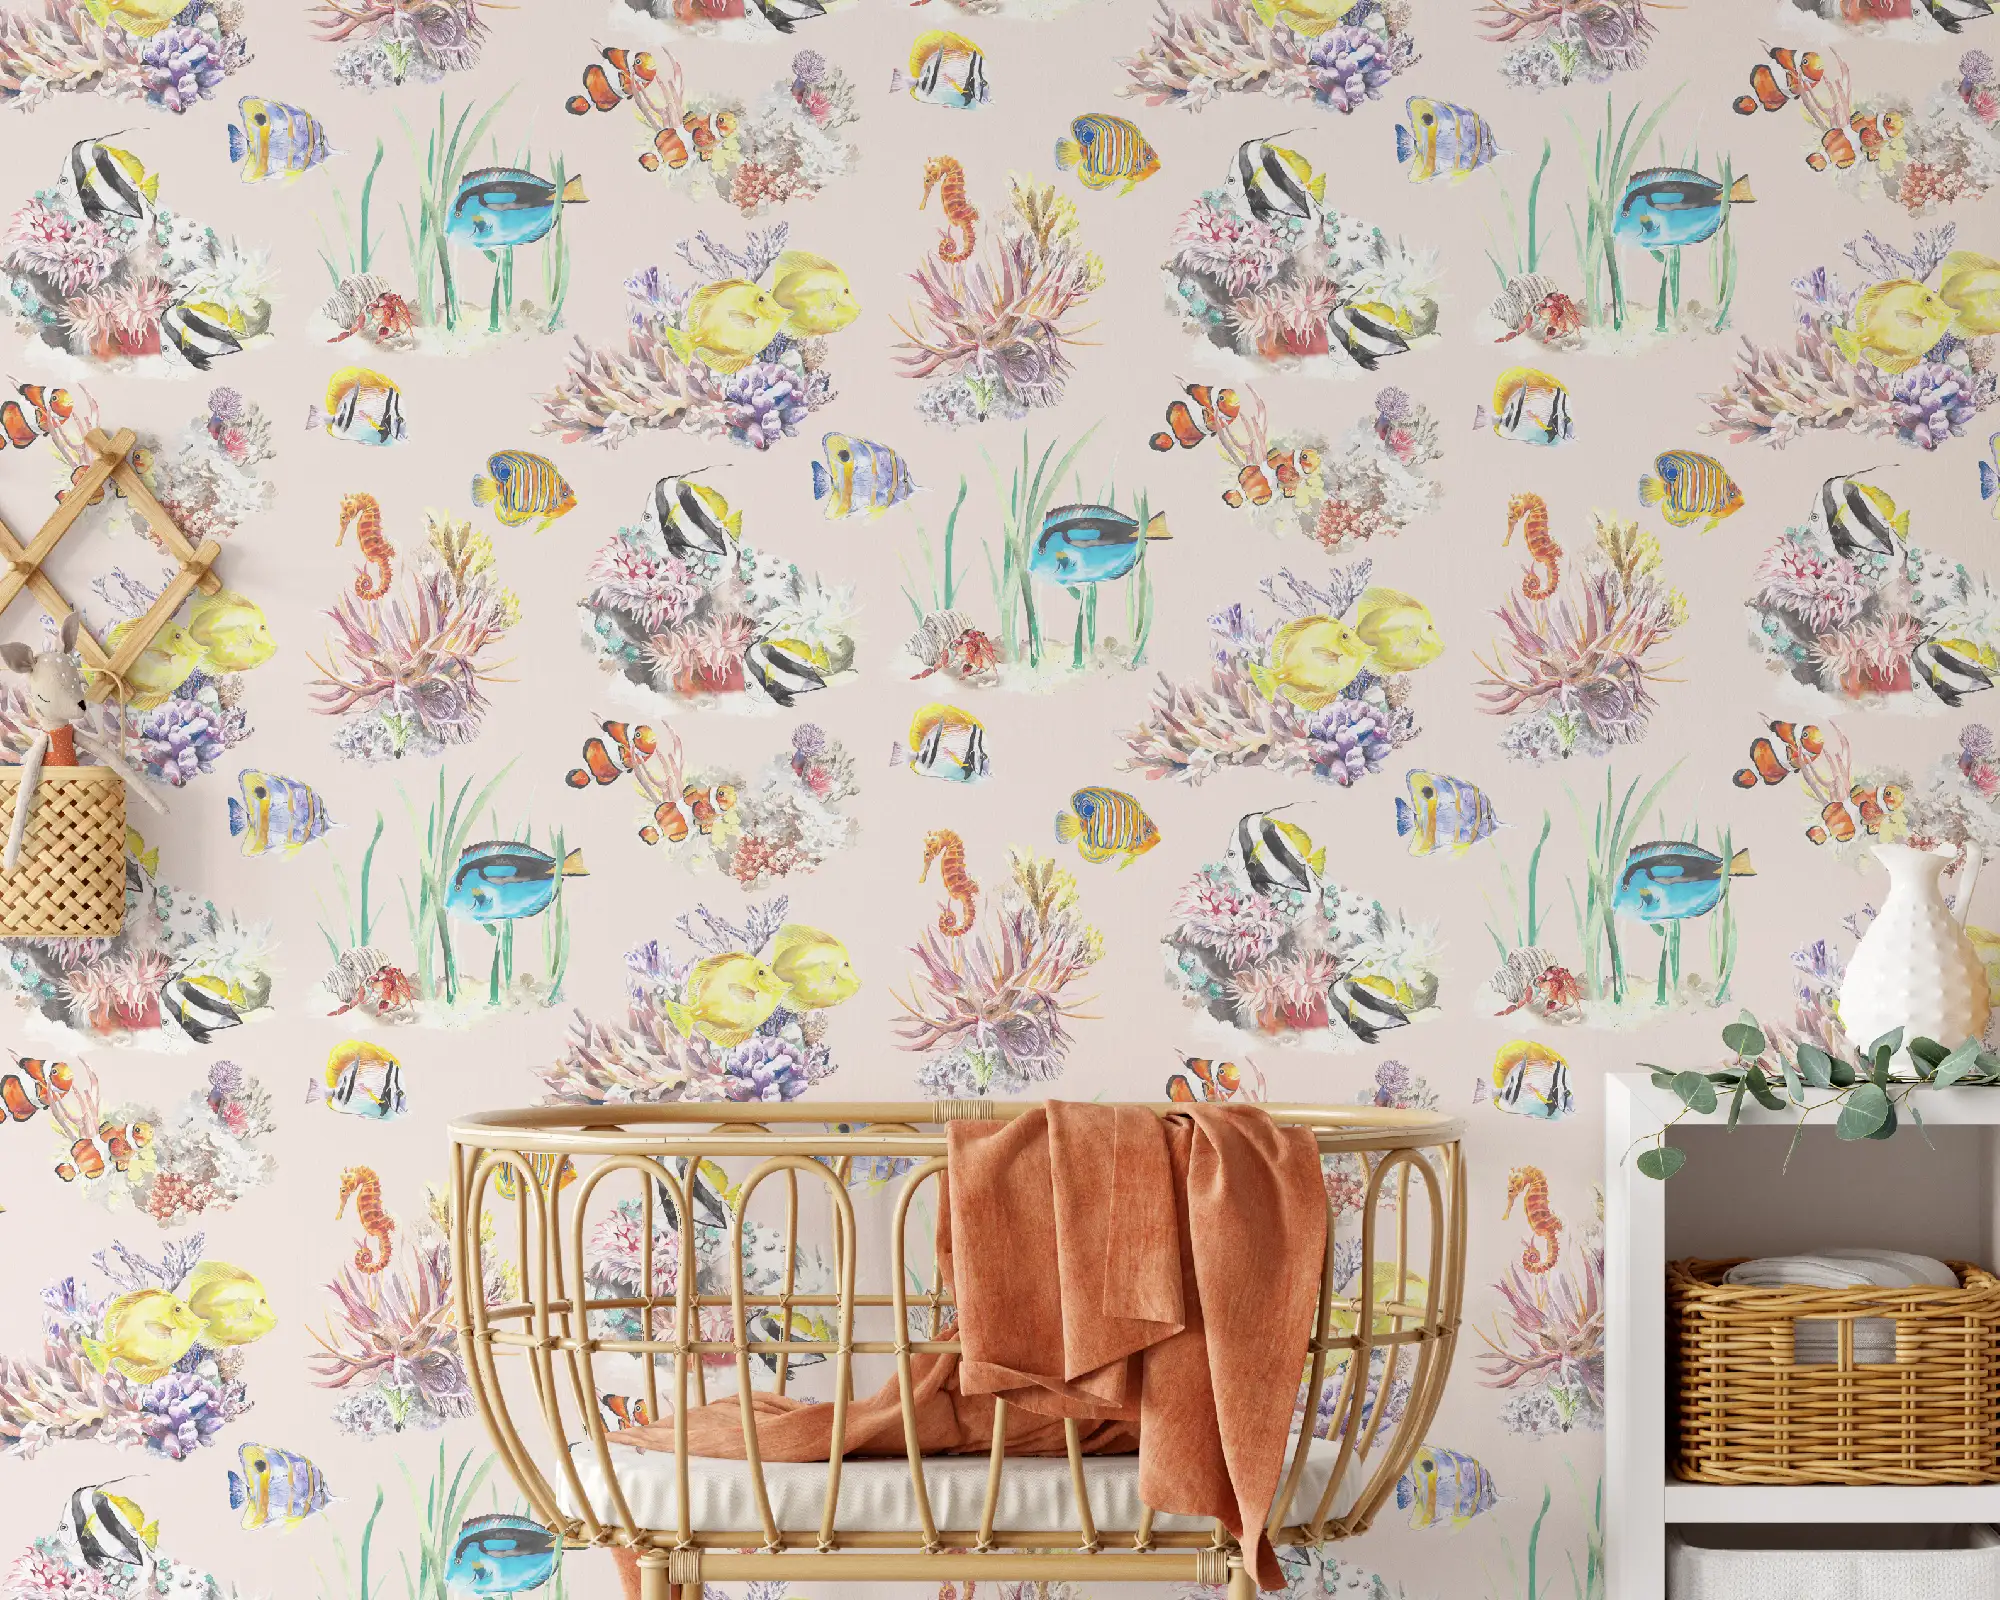 Coral Reef Wallpaper in Blush8